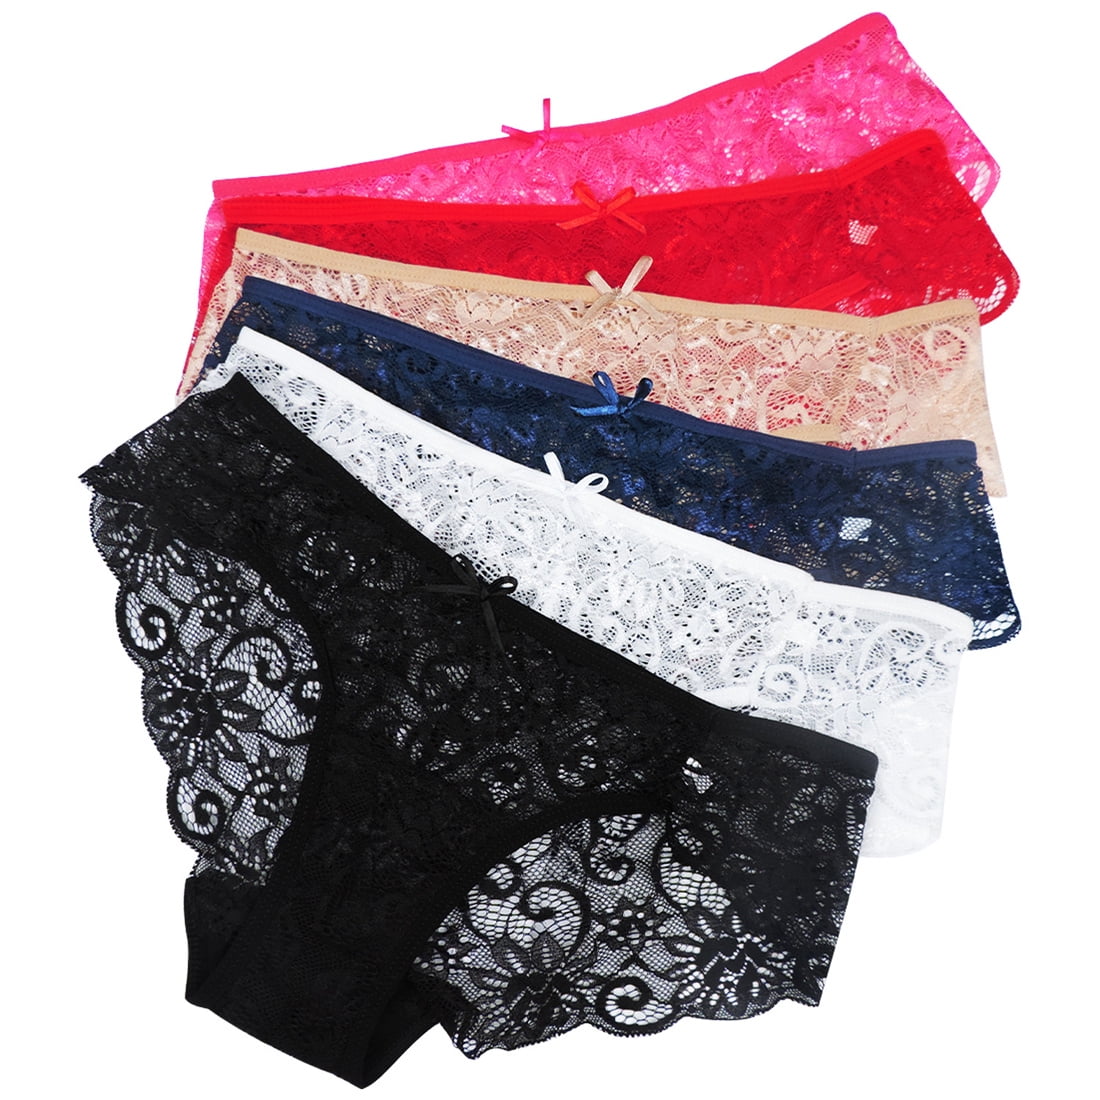 Lyacmy Lace Underwear For Woman Sexy Panties For Woman Woman Underwear Cotton Briefs Bikini